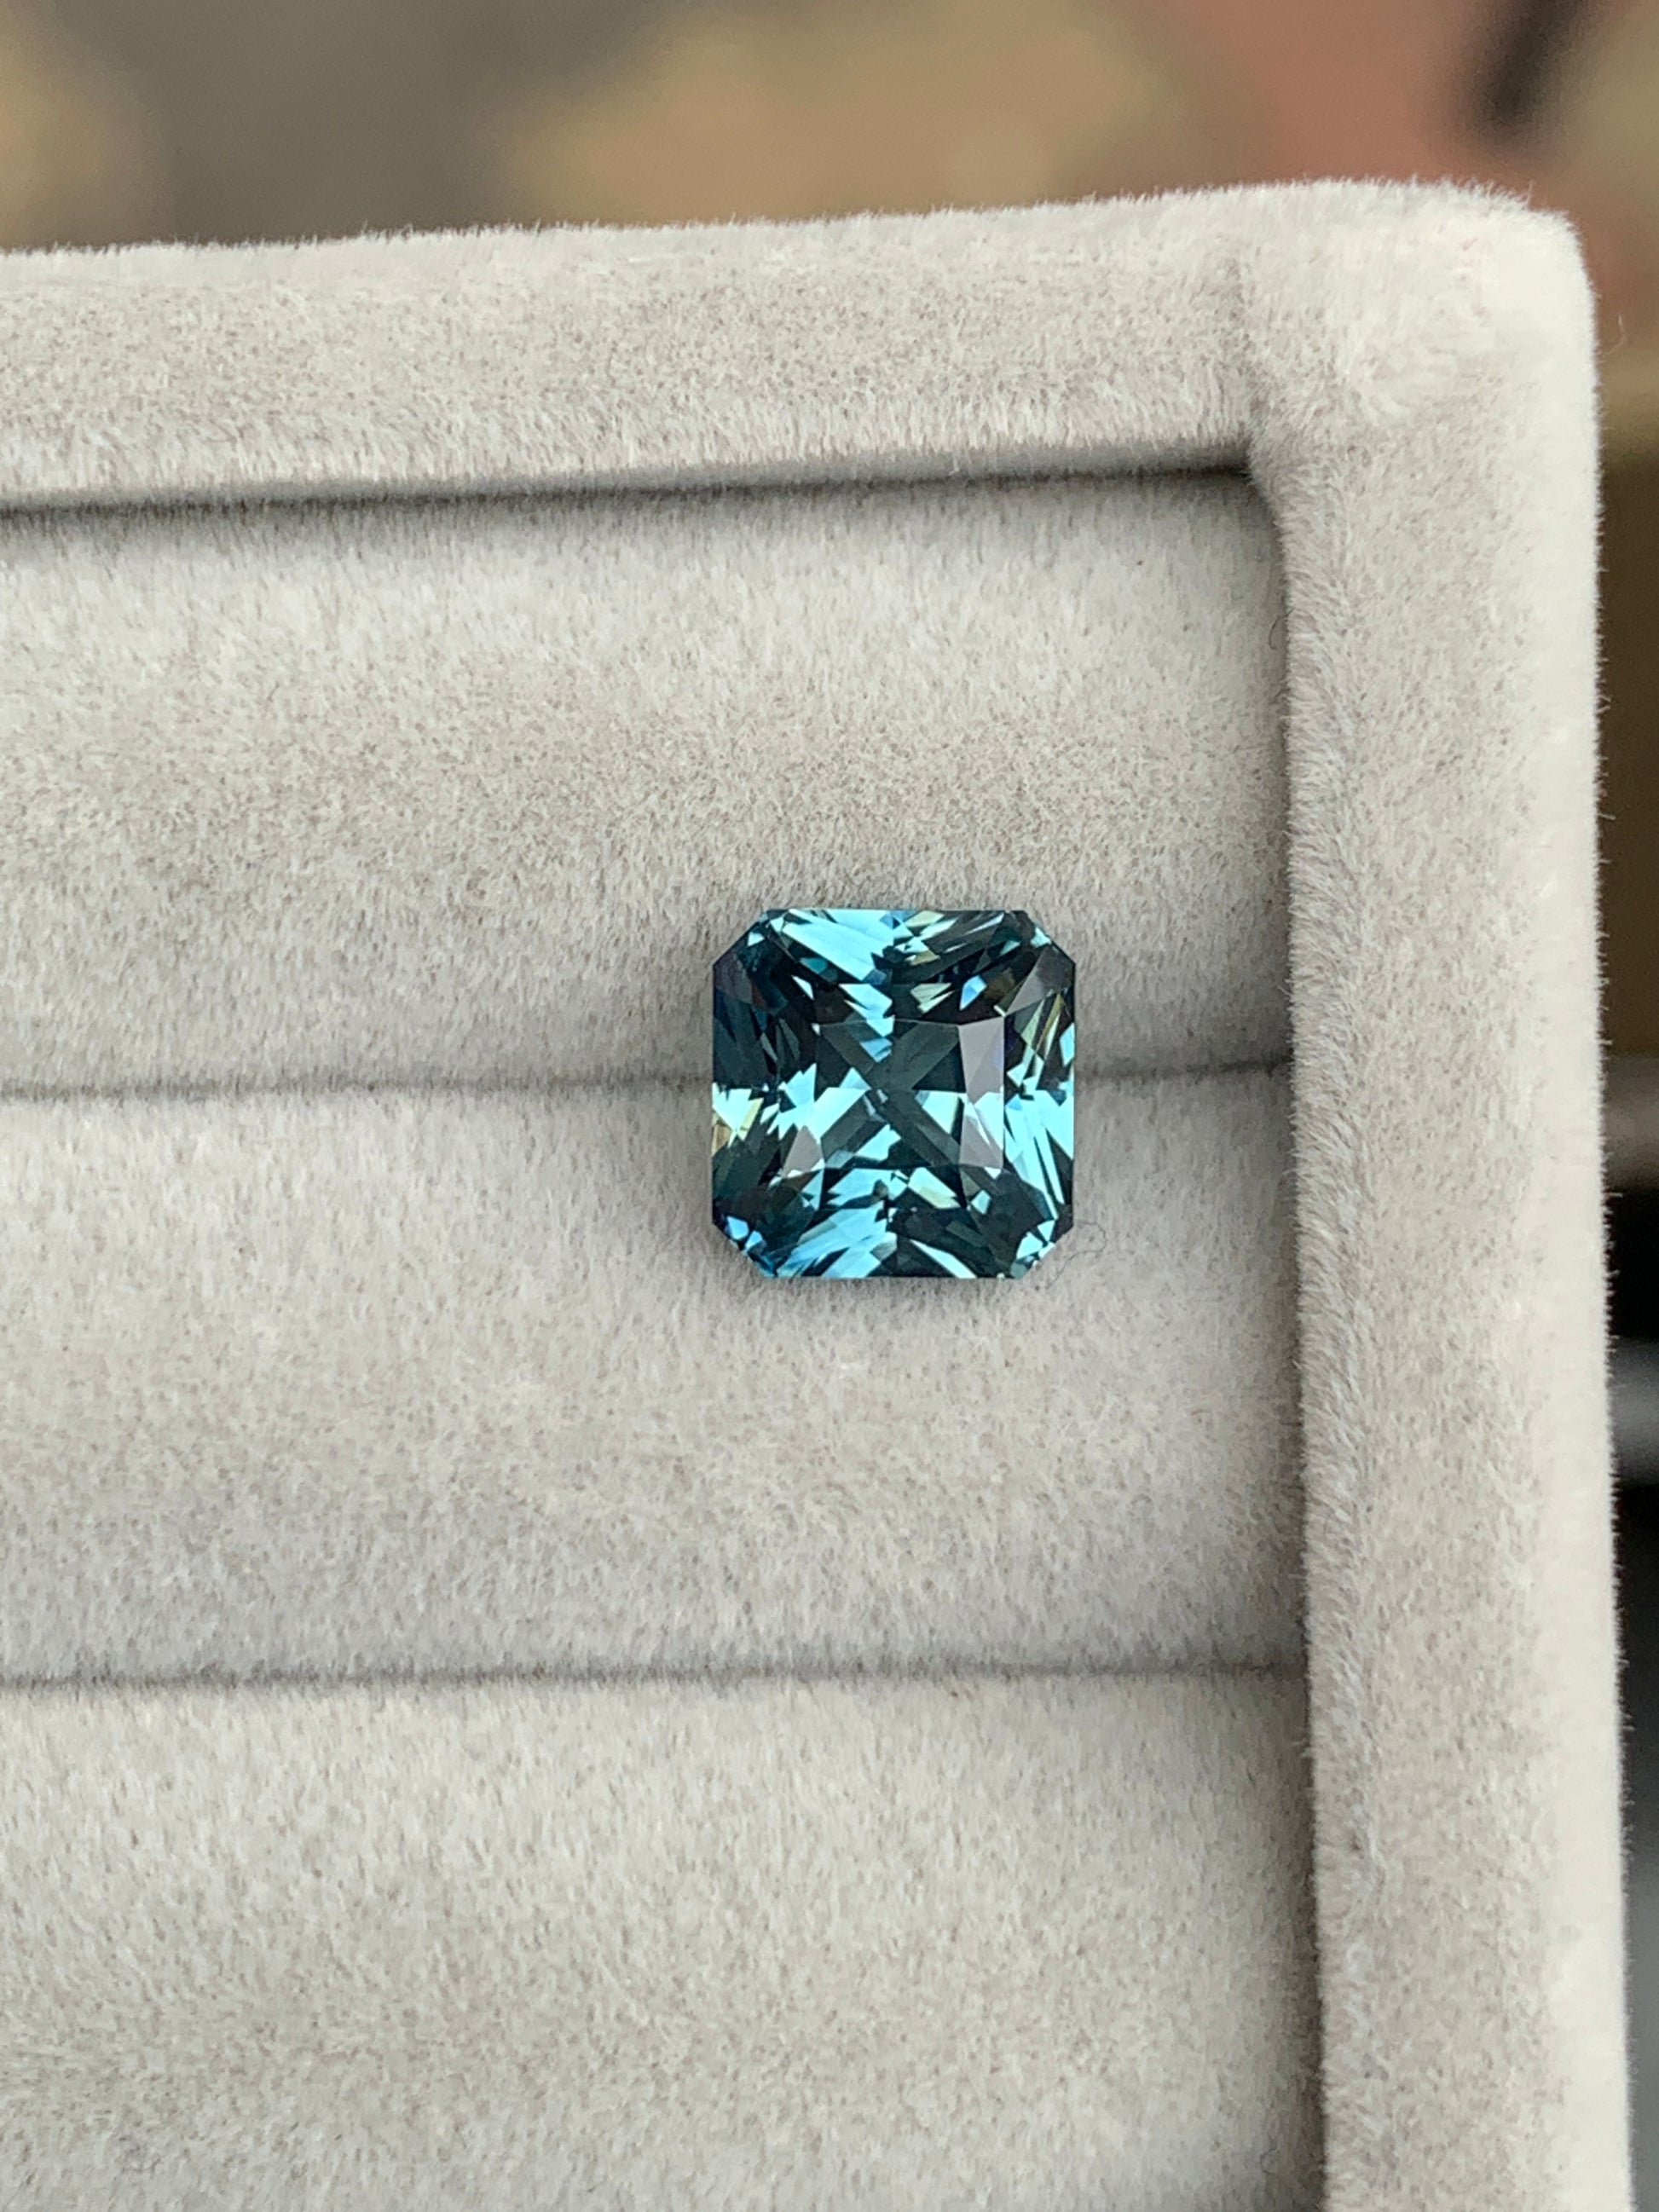 seconde photo Saphir Teal taille carré · 3,9ct